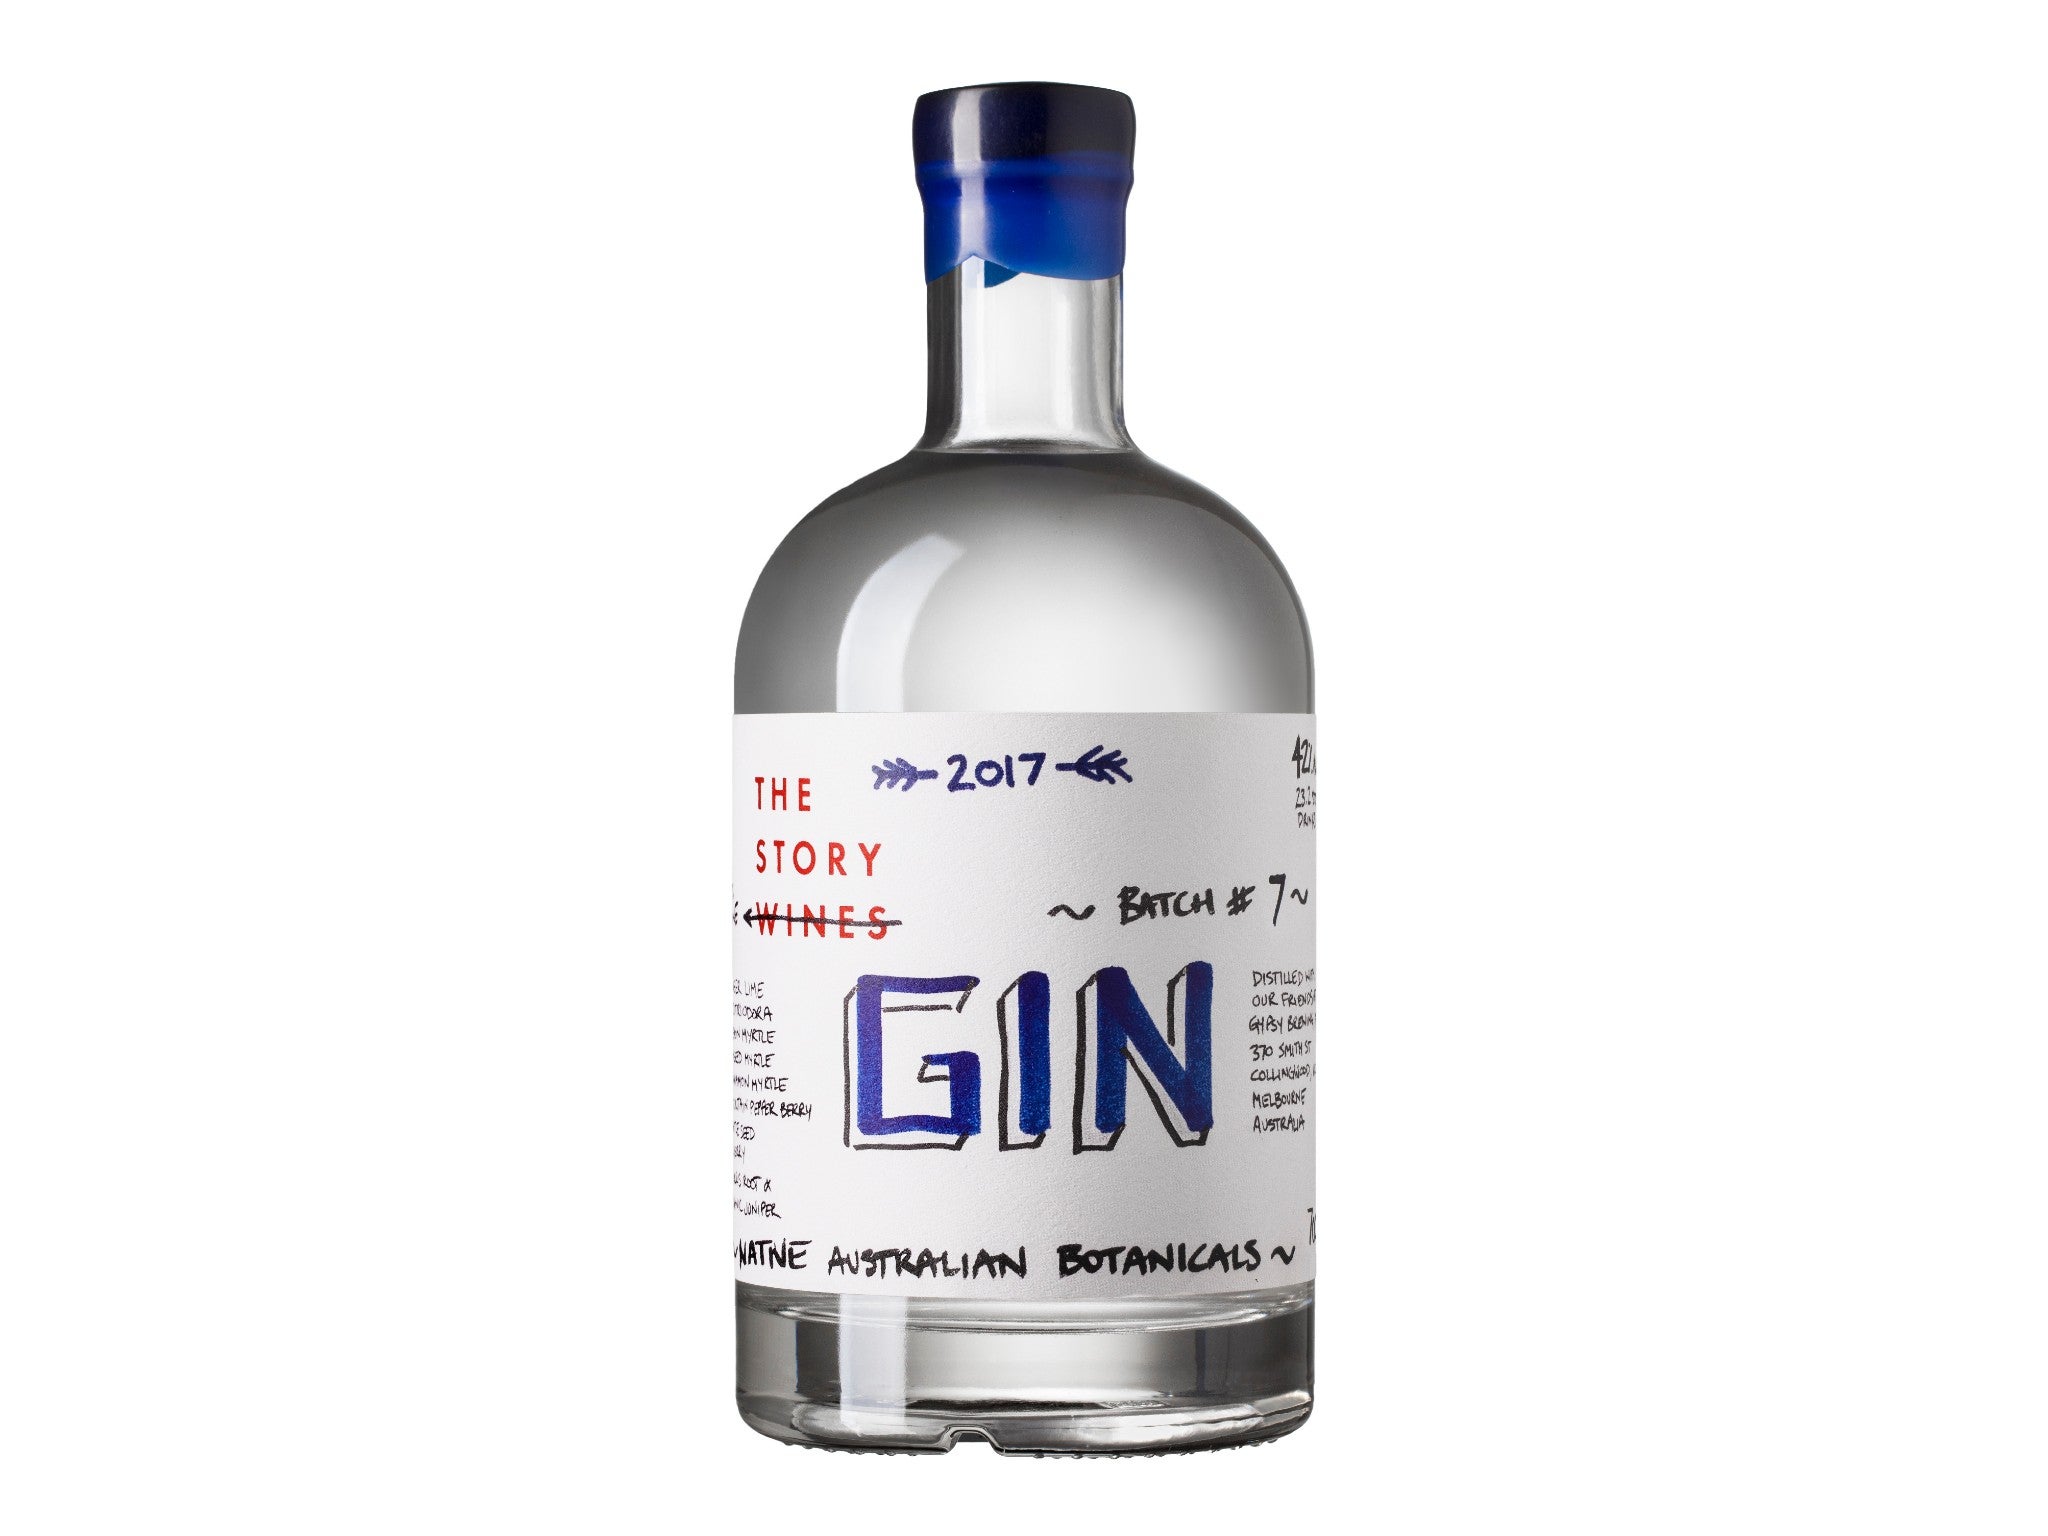 The Story Wines gin, 70cl indybest.jpeg